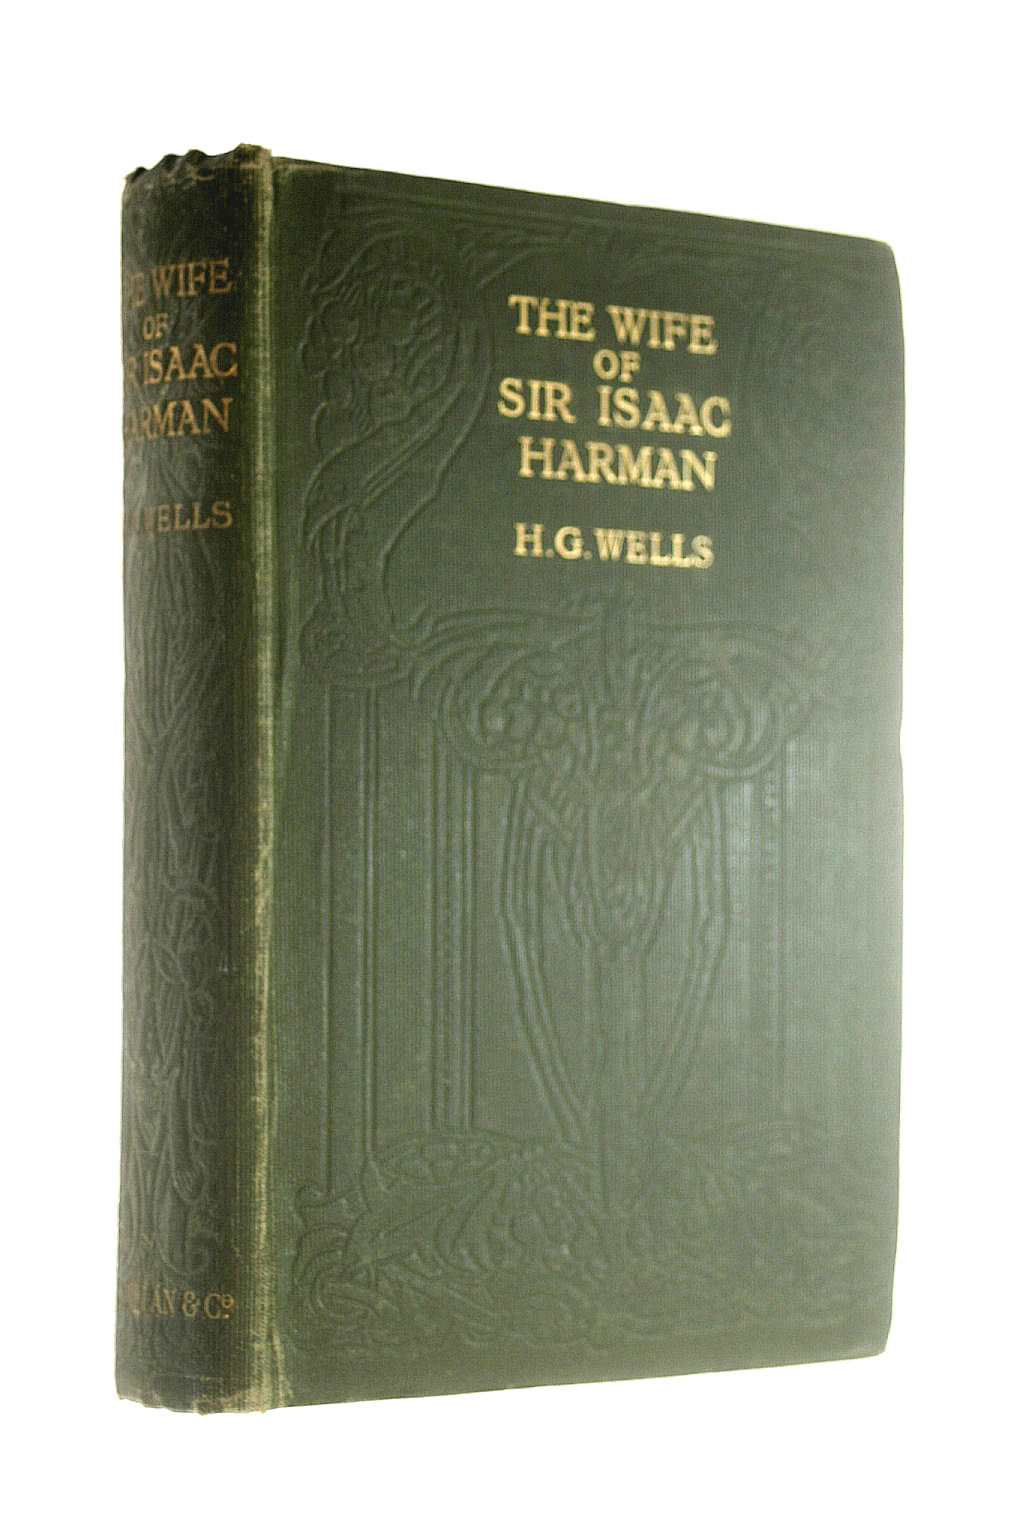 WELLS. H G. - The Wife of Sir Isaac Harman / by H. G. Wells